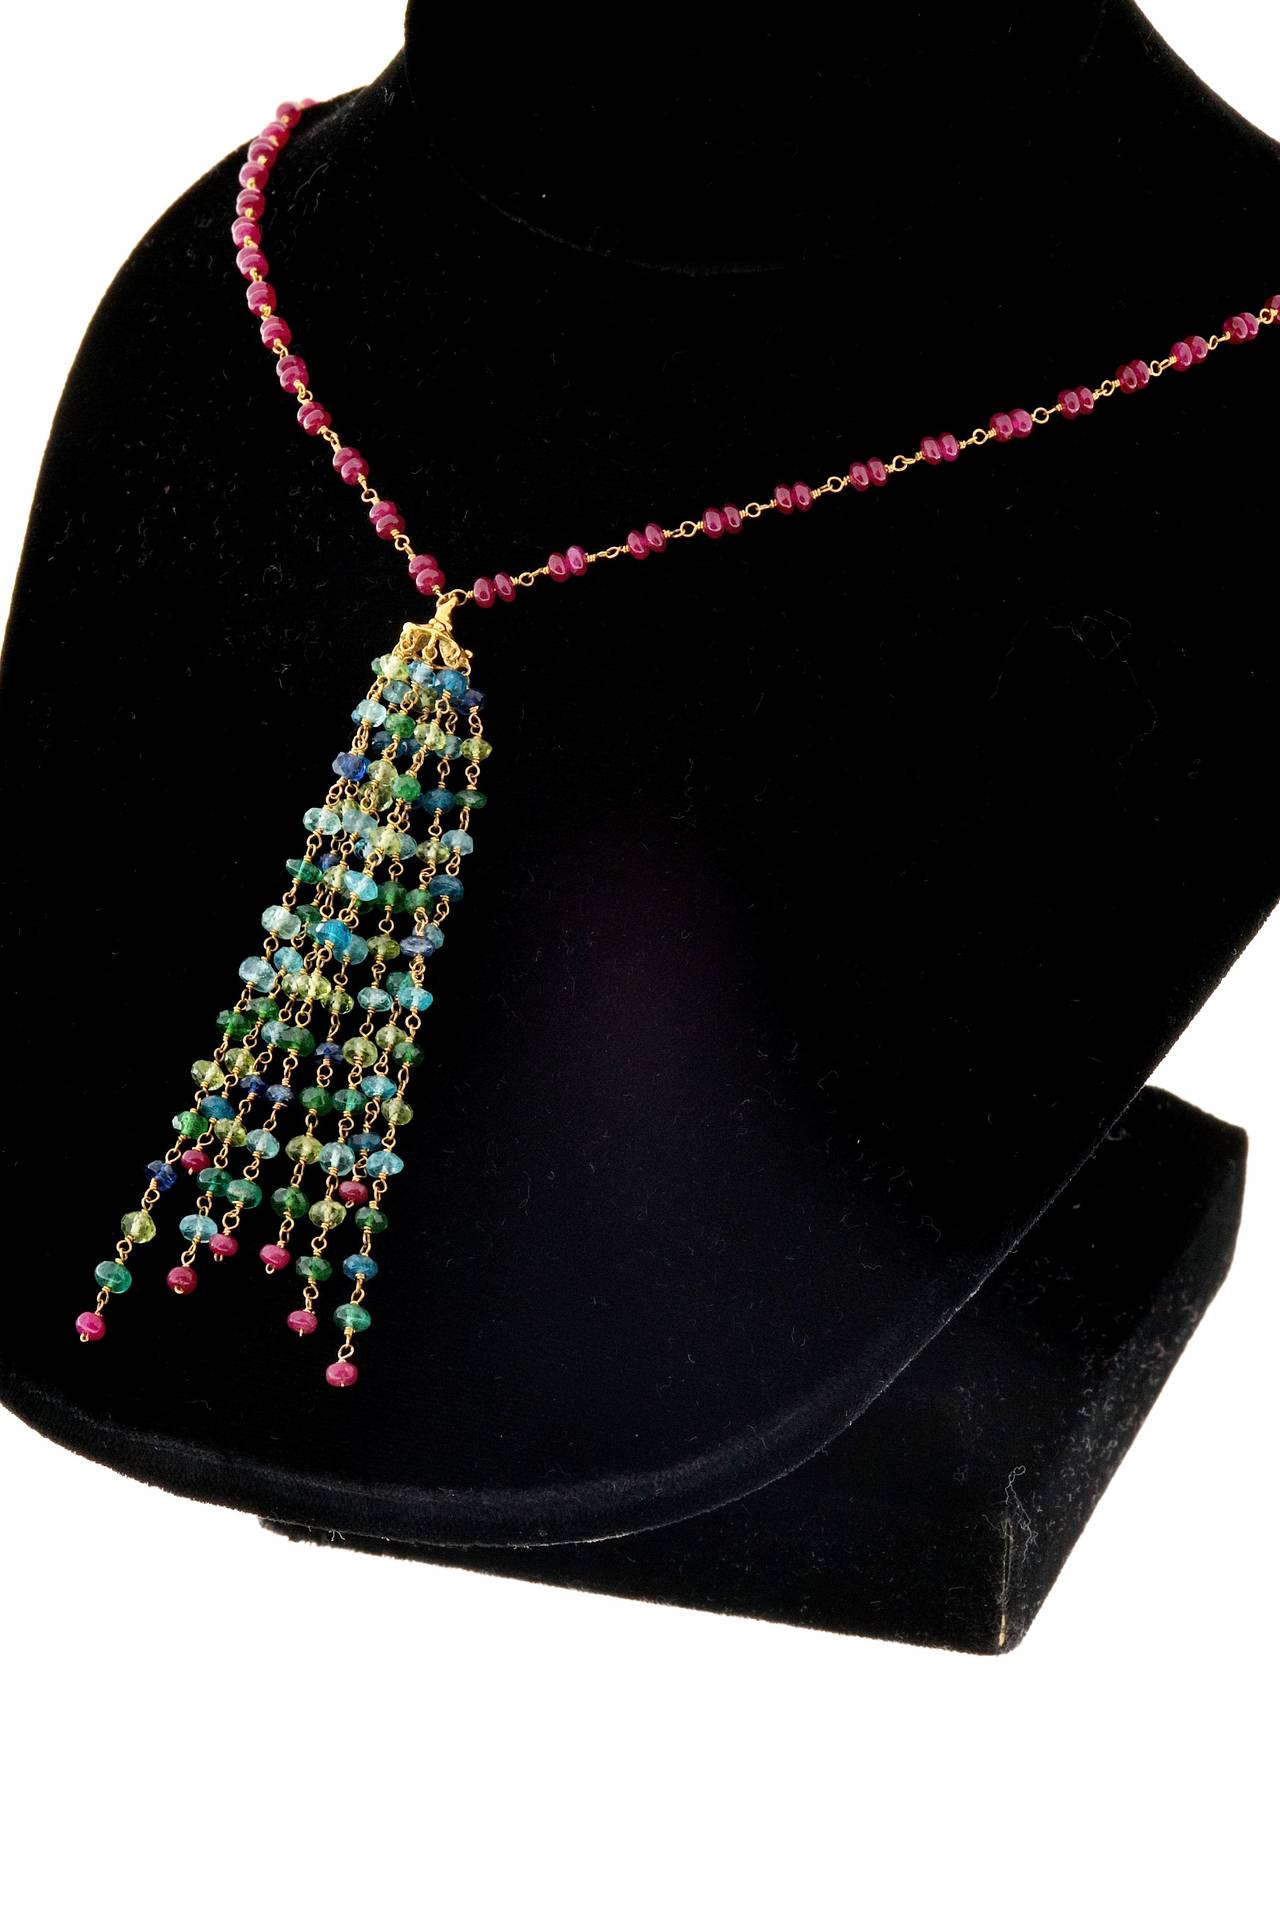 Ruby Aqua Apatite Emerald Peridot Hand Wired Rondell Bead Pendant Necklace In Excellent Condition For Sale In Stamford, CT